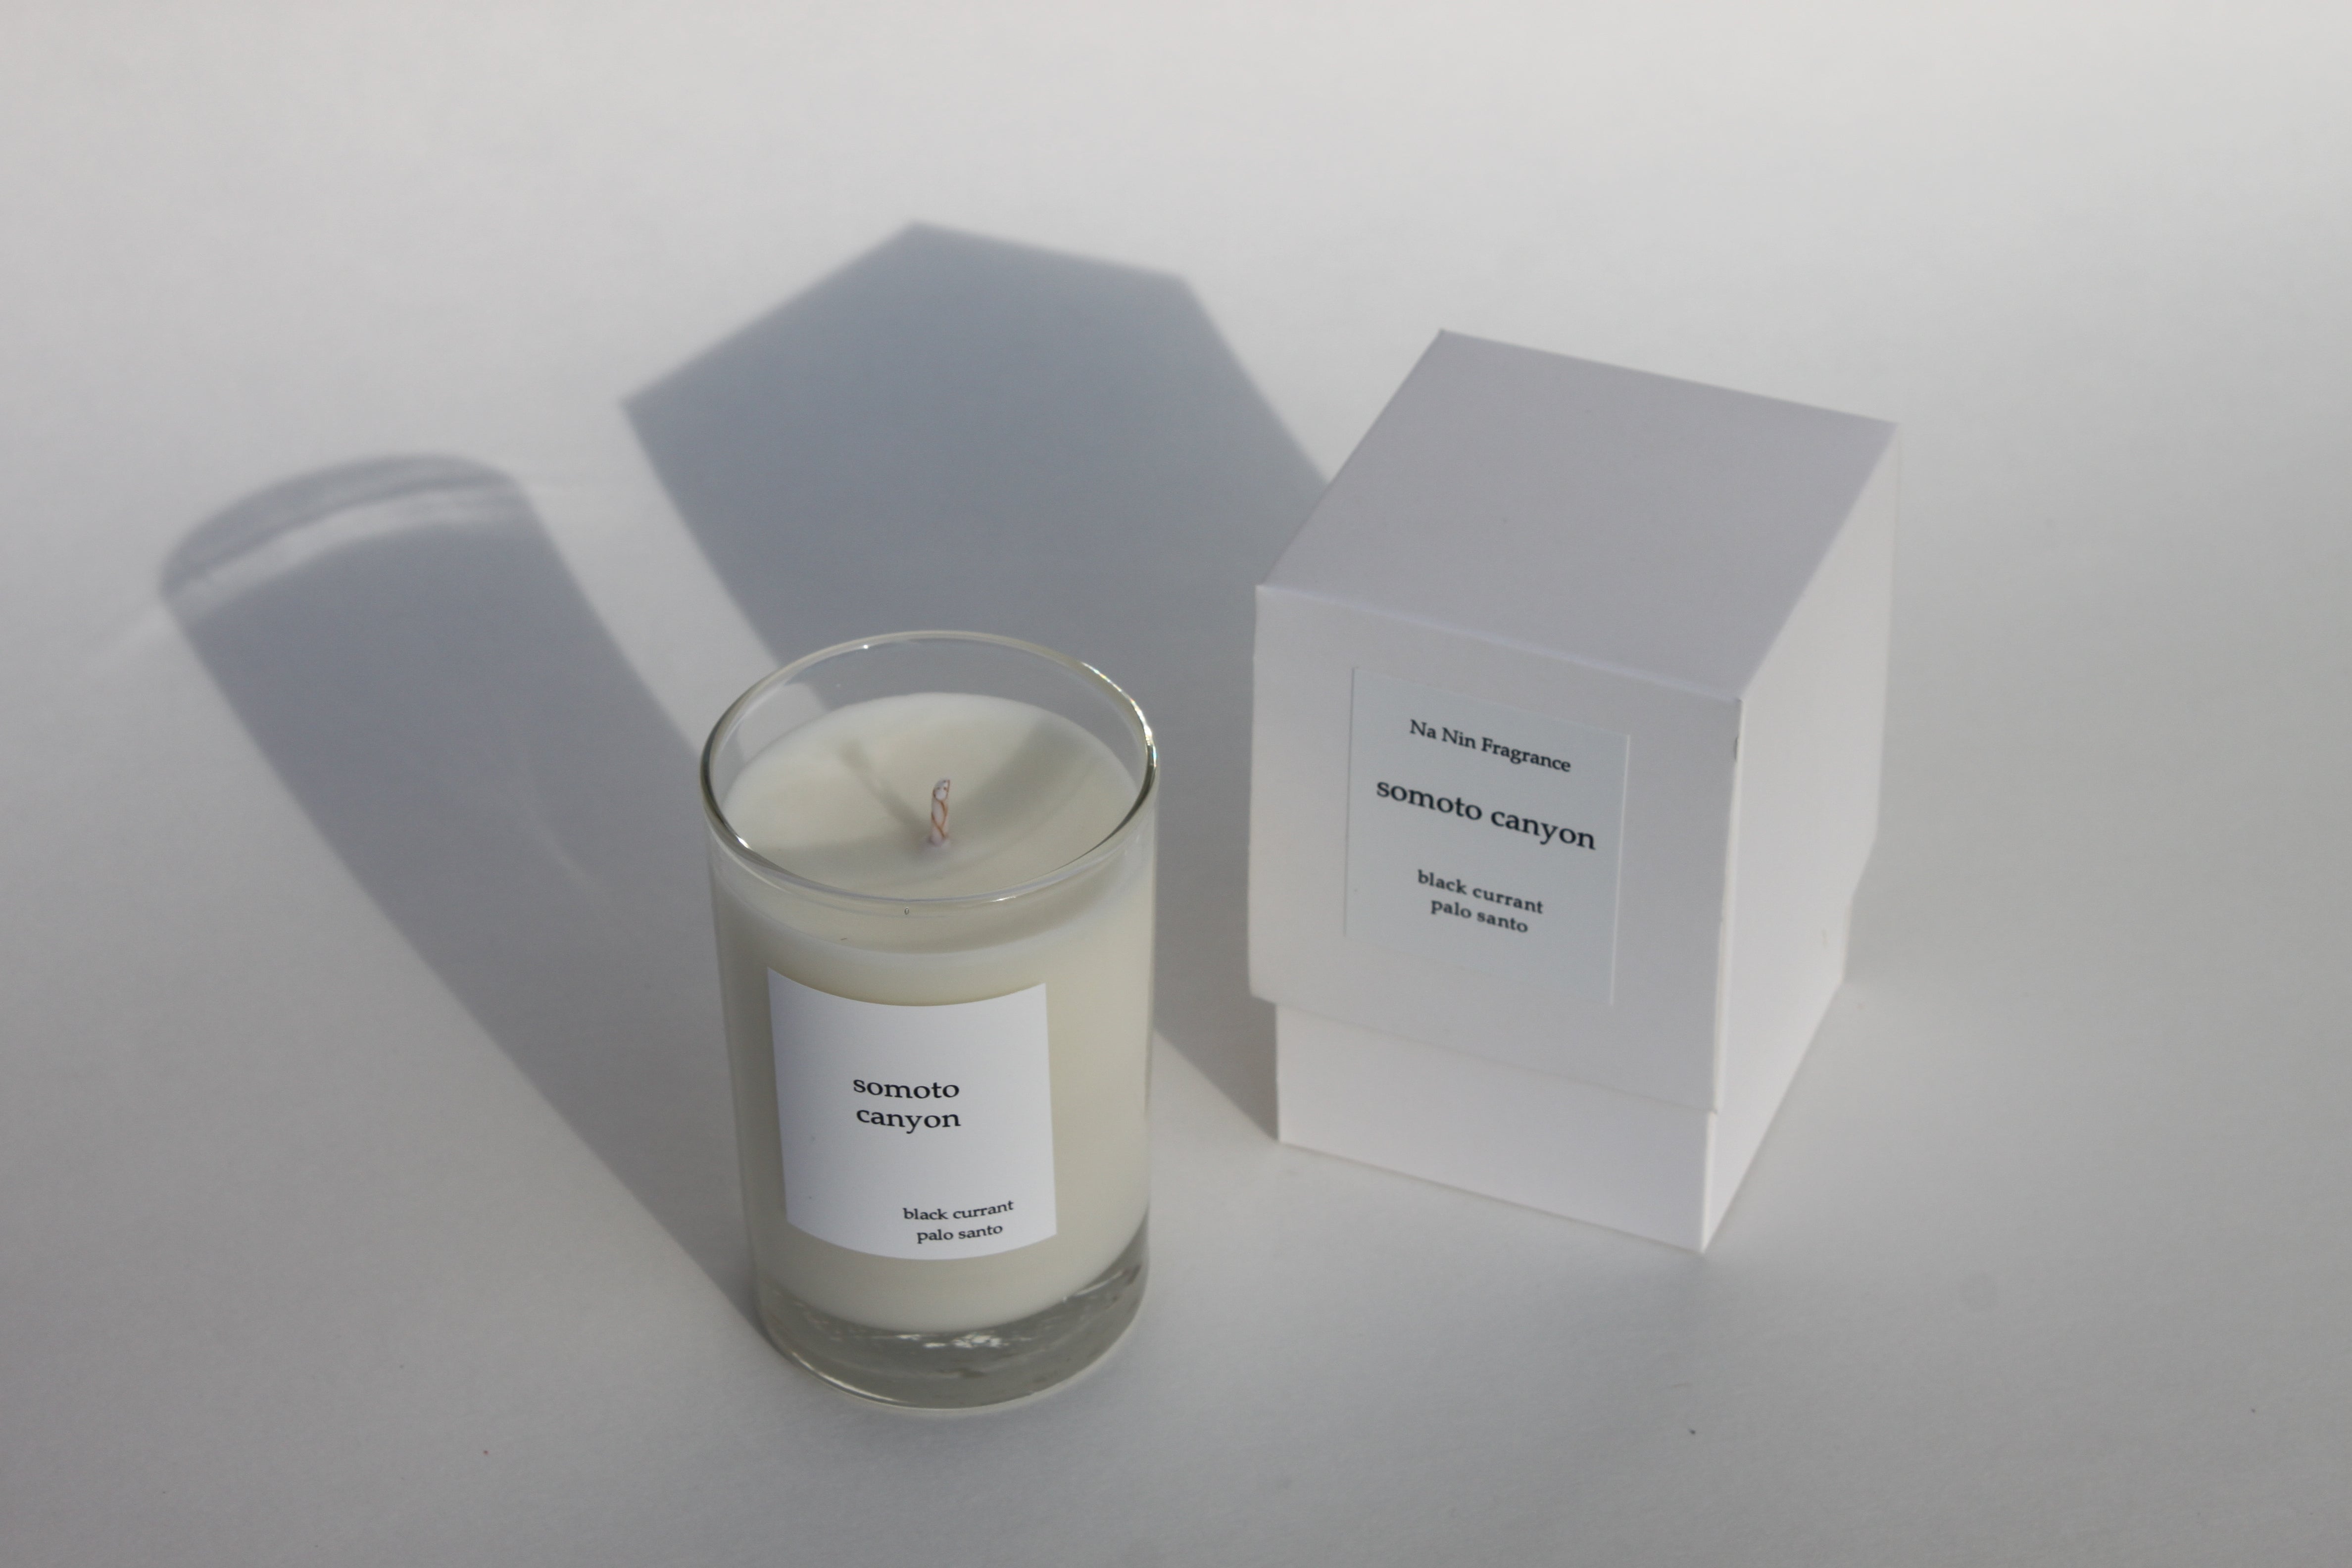 Case of 6 x Somoto Canyon Candle / Available in Multiple Sizes